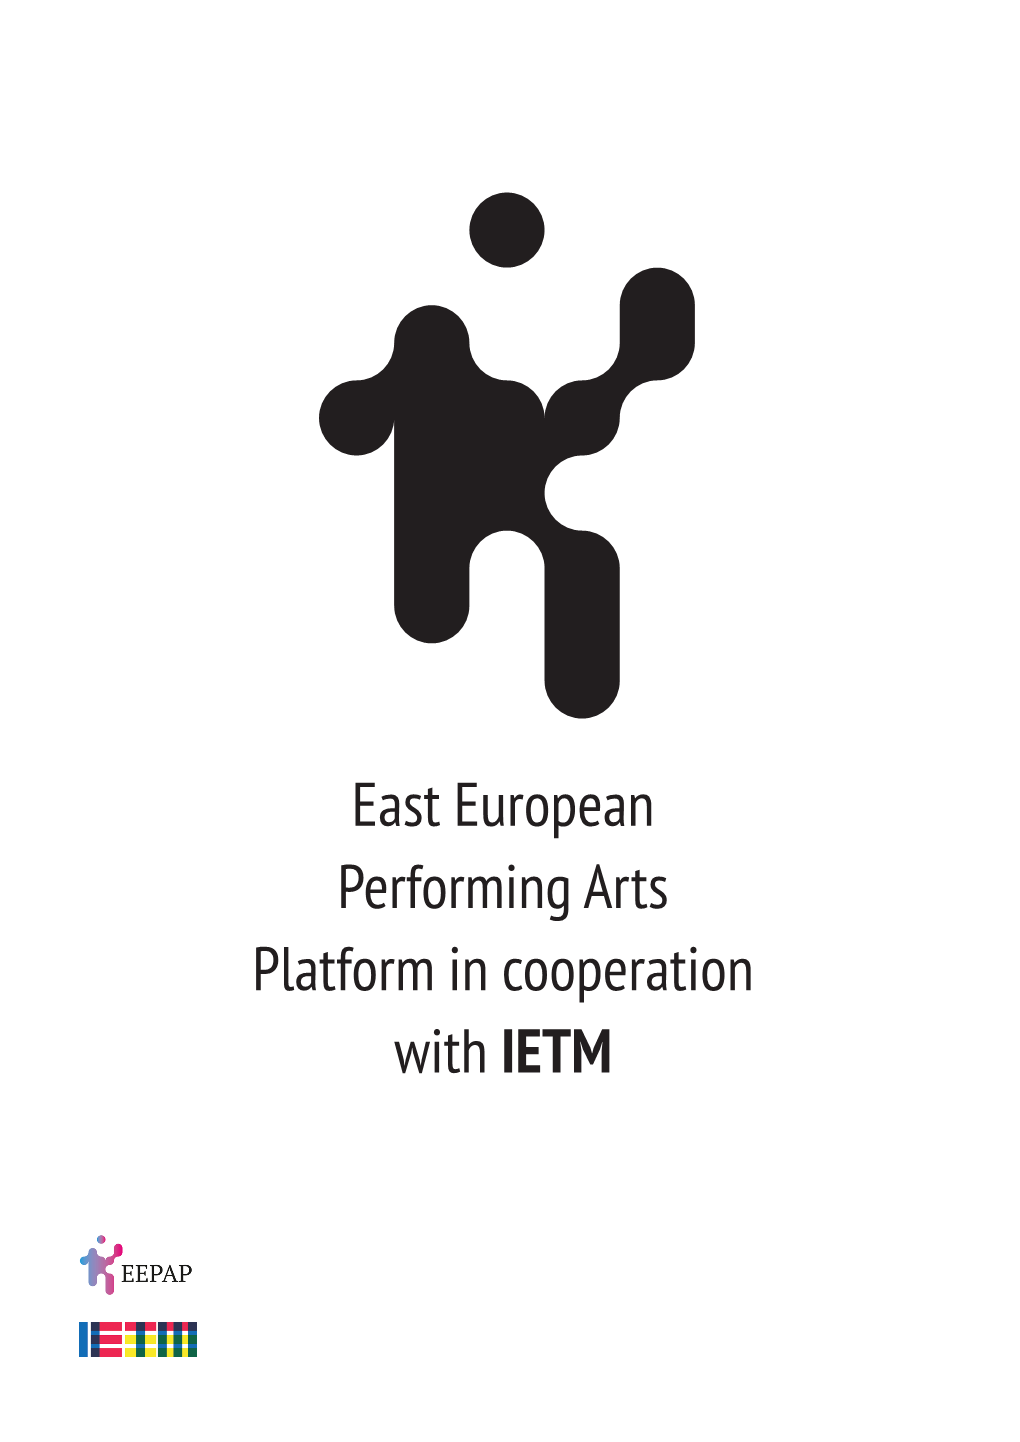 East European Performing Arts Platform in Cooperation with IETM